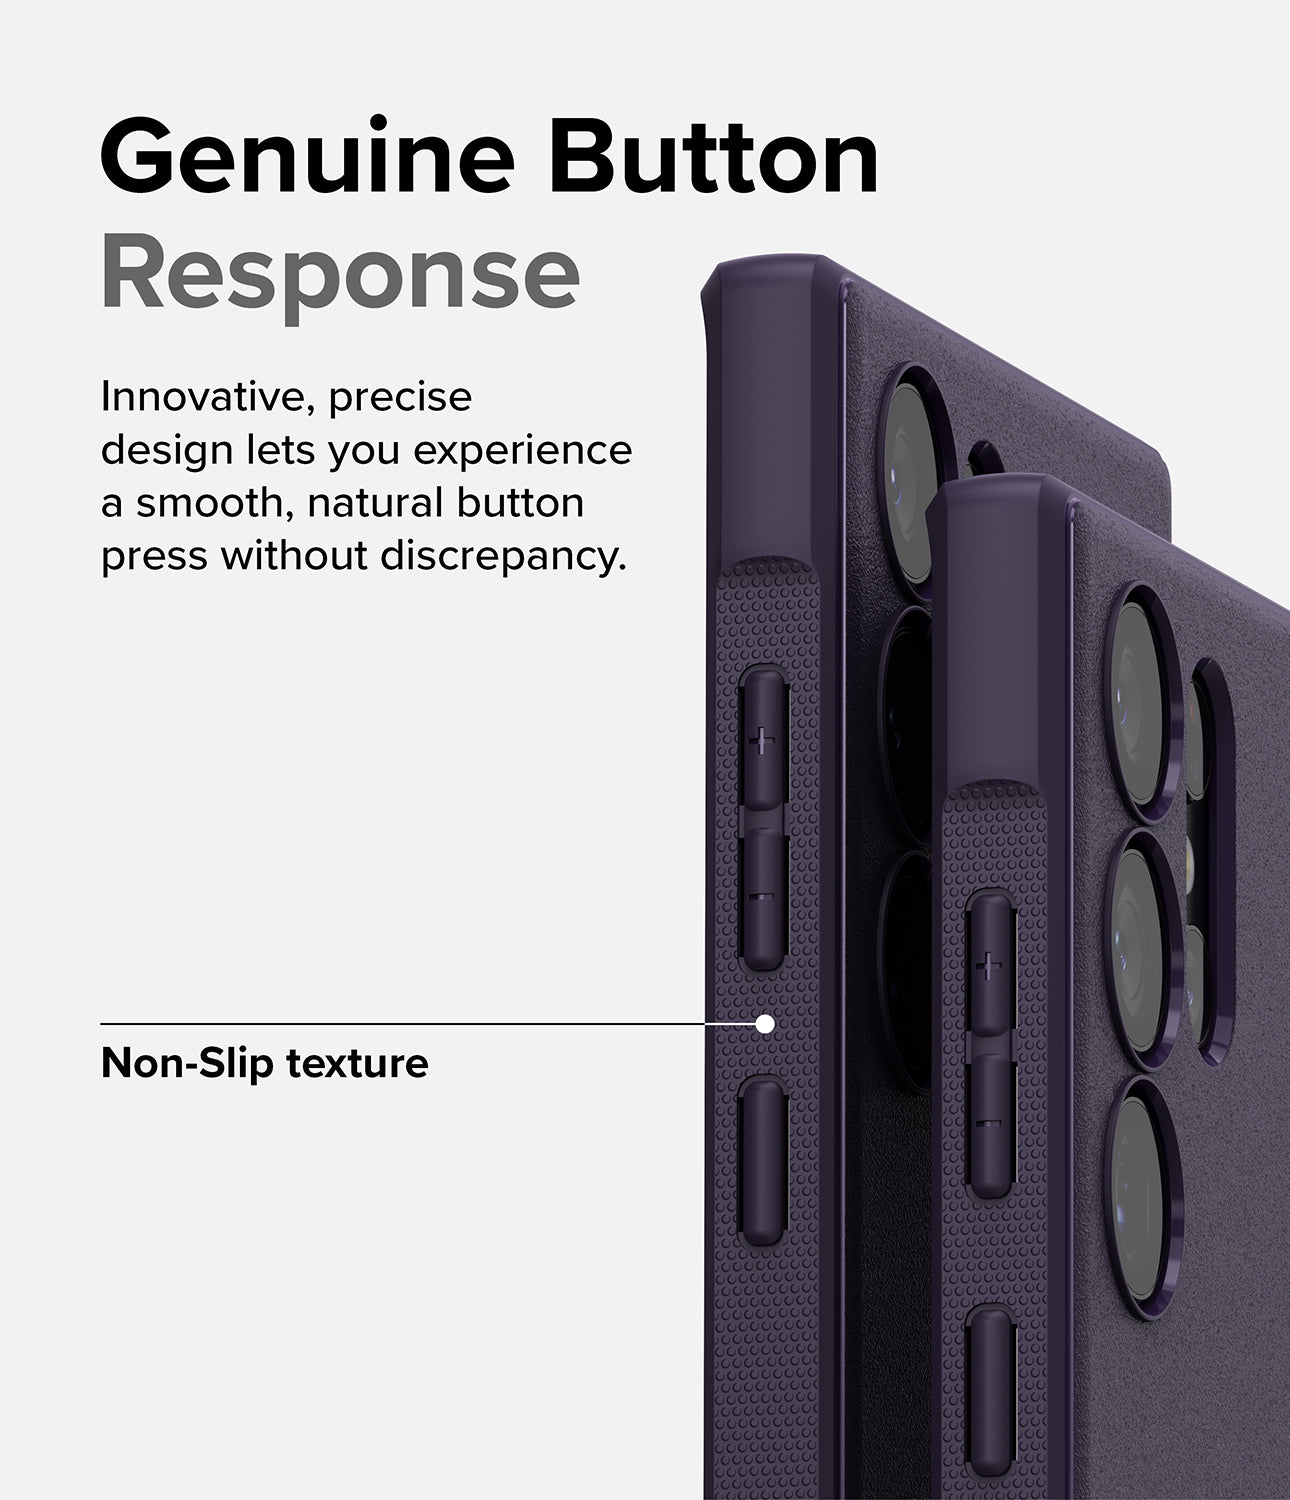 Galaxy S23 Ultra Case | Onyx - Deep Purple - Genuine Button Response. Innovative, precise design lets you experience a smooth, natural button press without discrepancy. Non-Slip texture.